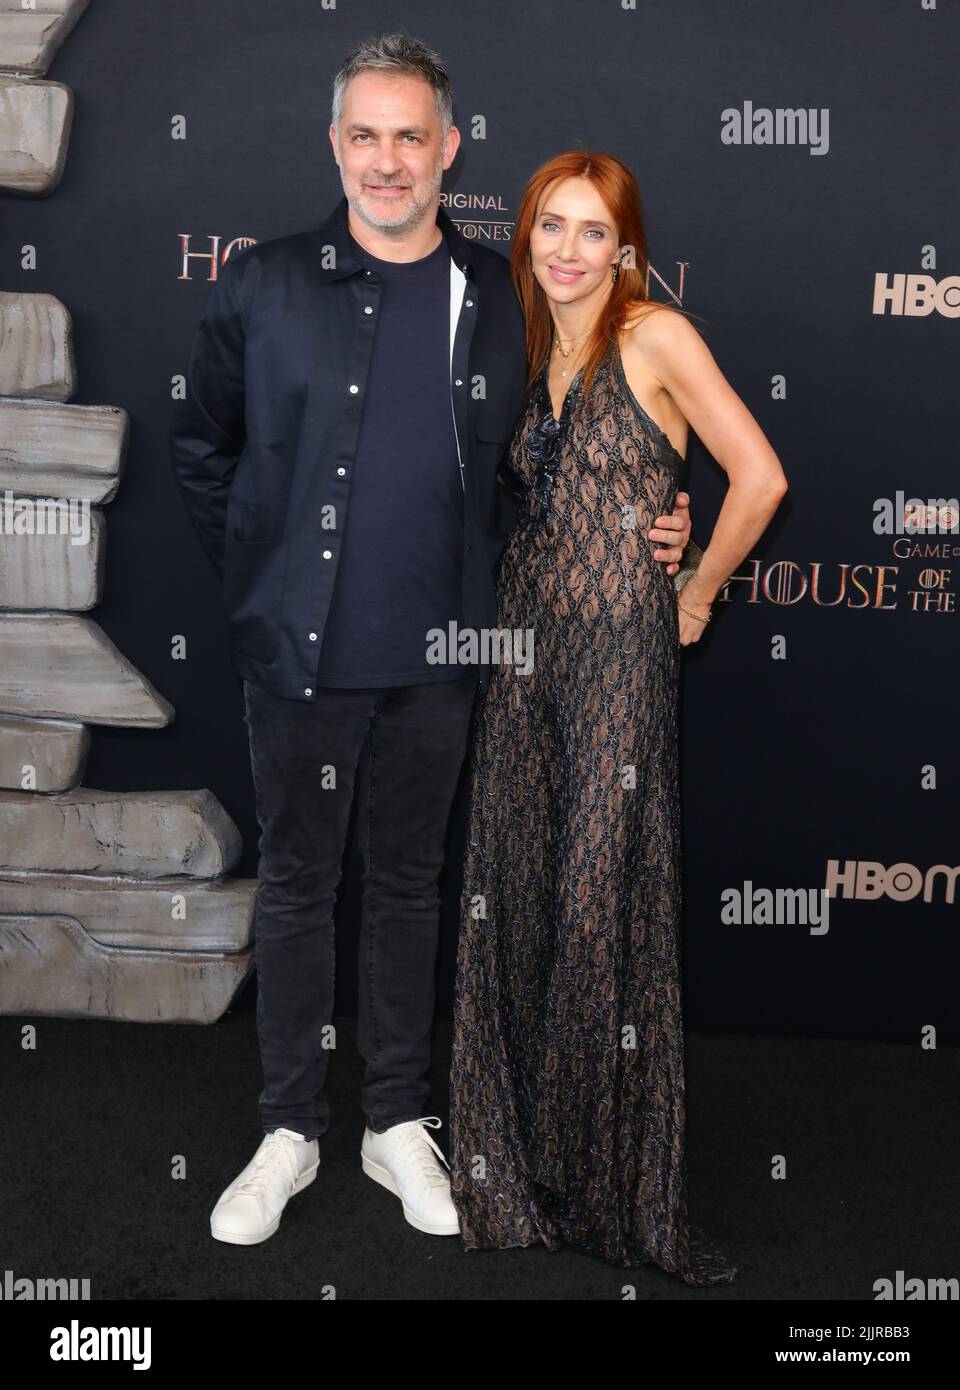 Miguel Sapochnik arrives at The HBO Original Drama Series HOUSE OF THE ...